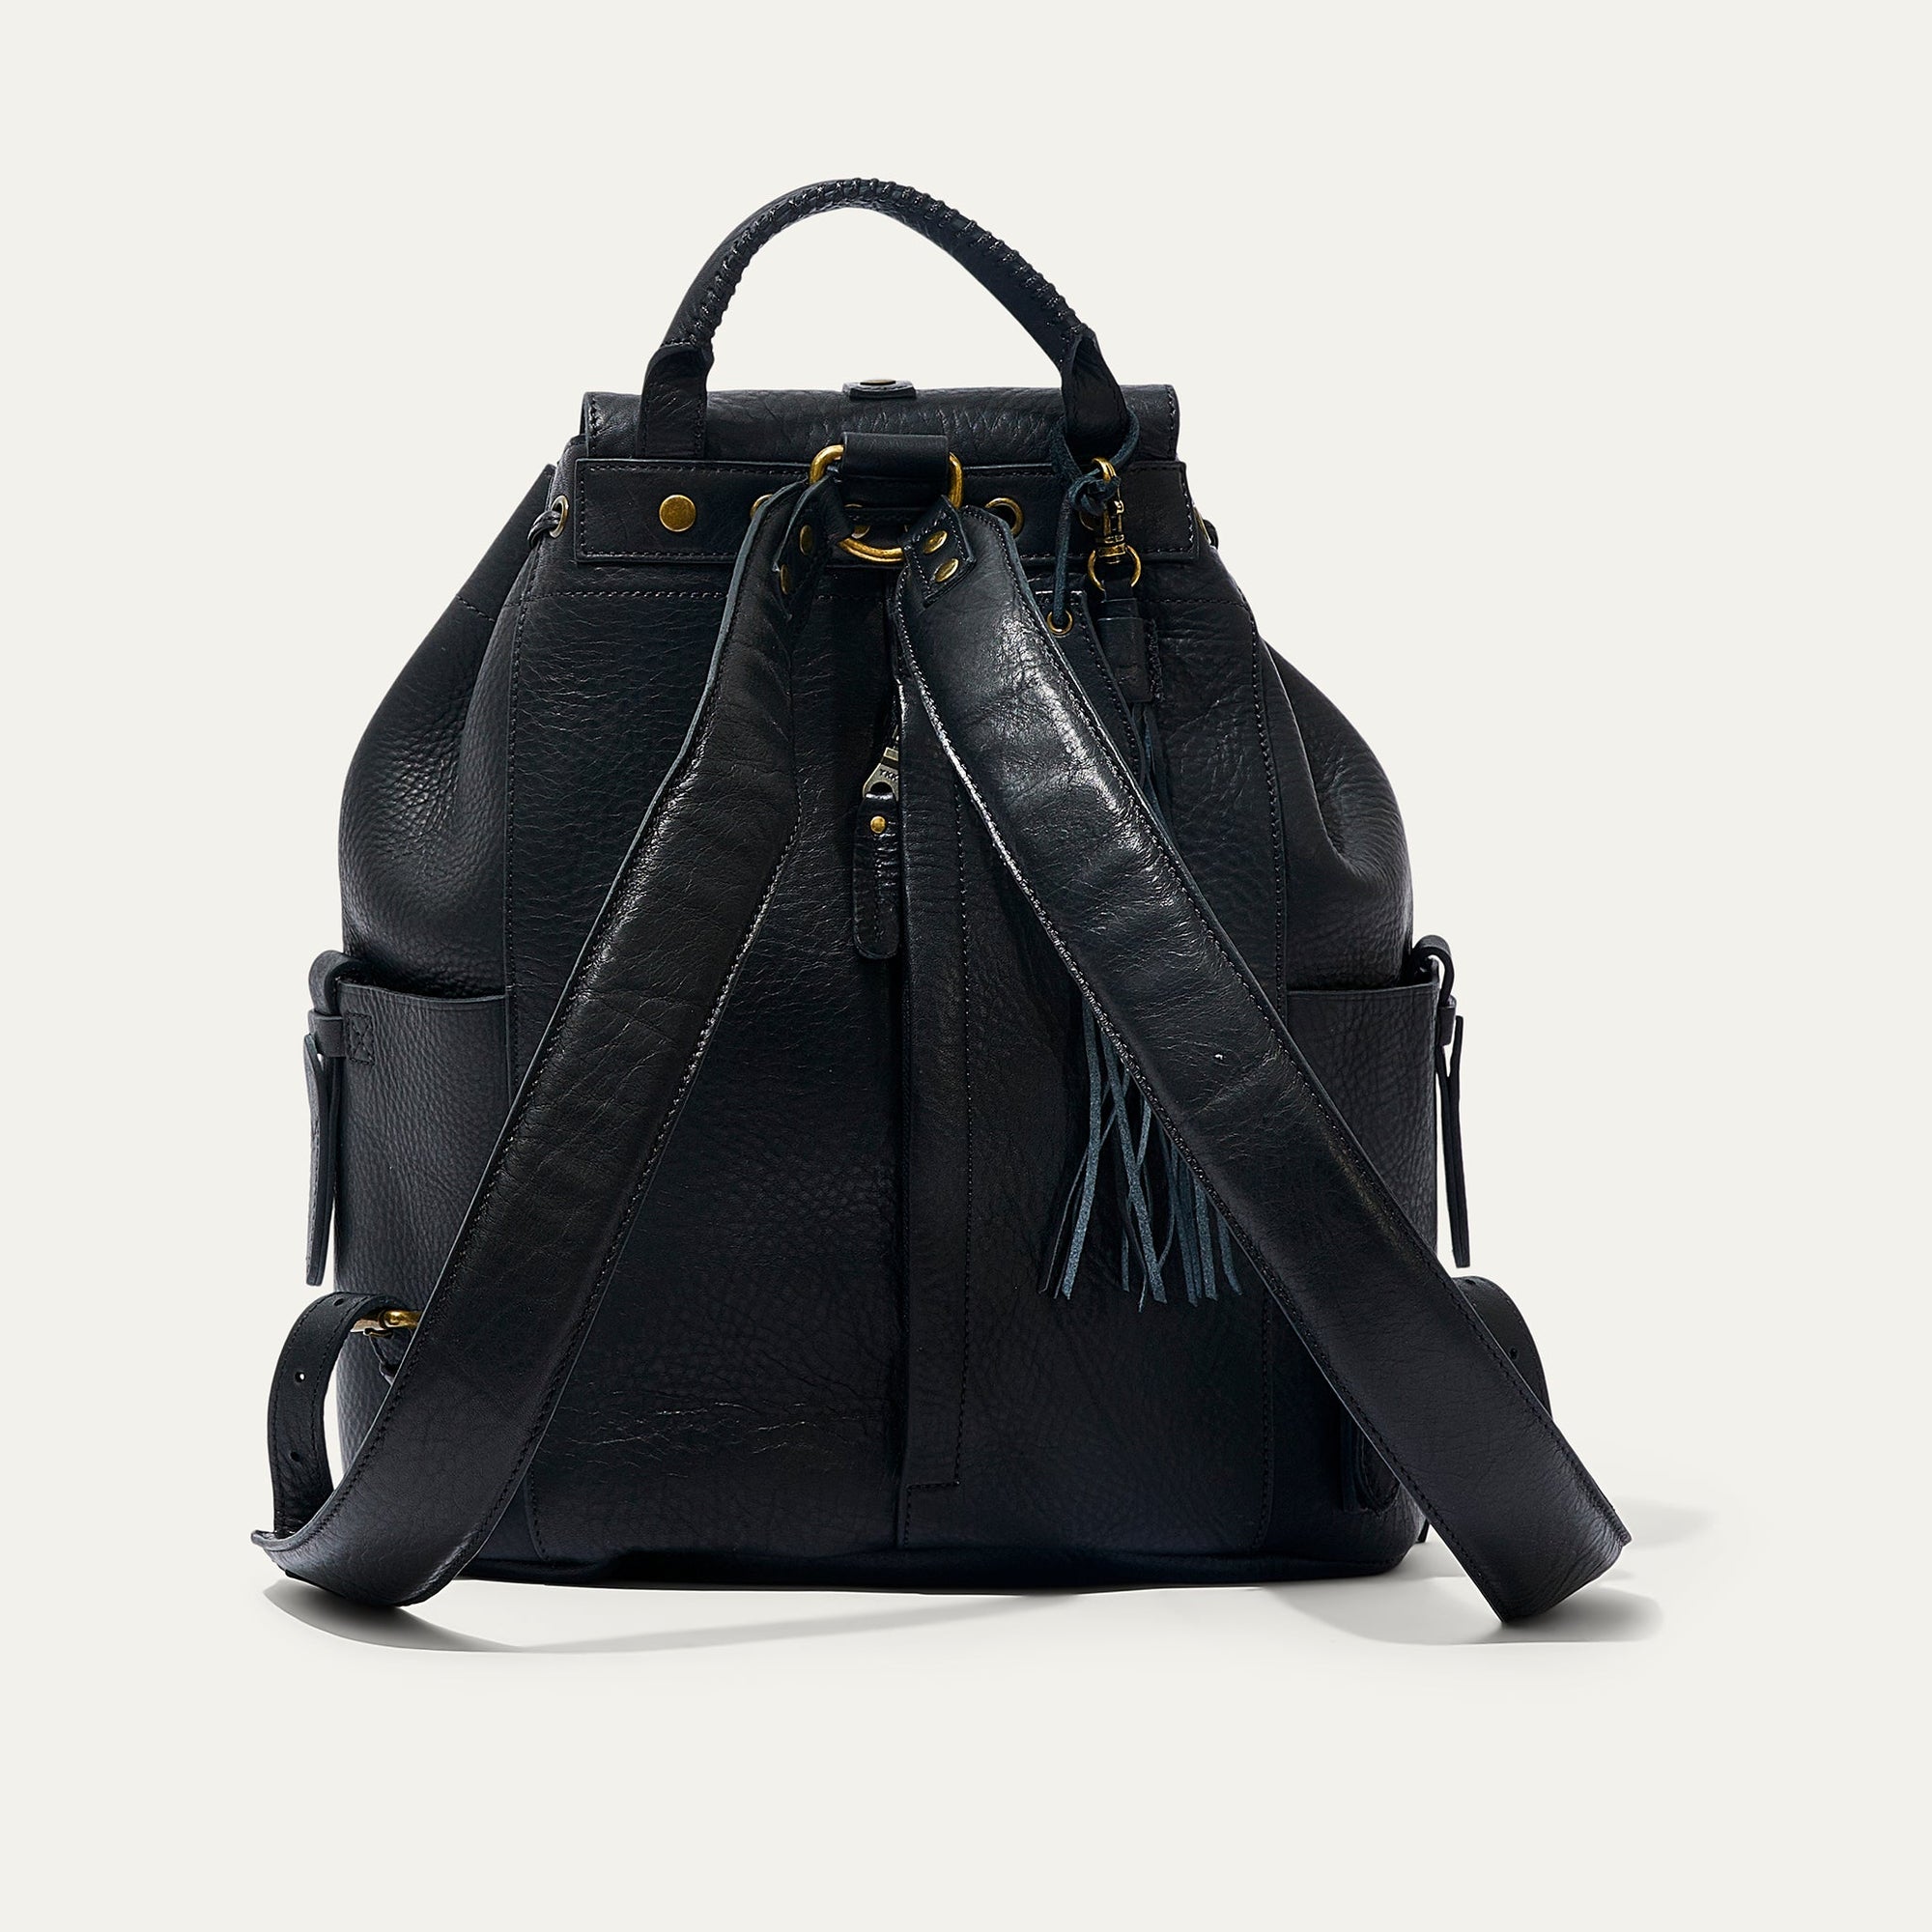 Rainier Leather Backpack in Black by Will Leather Goods